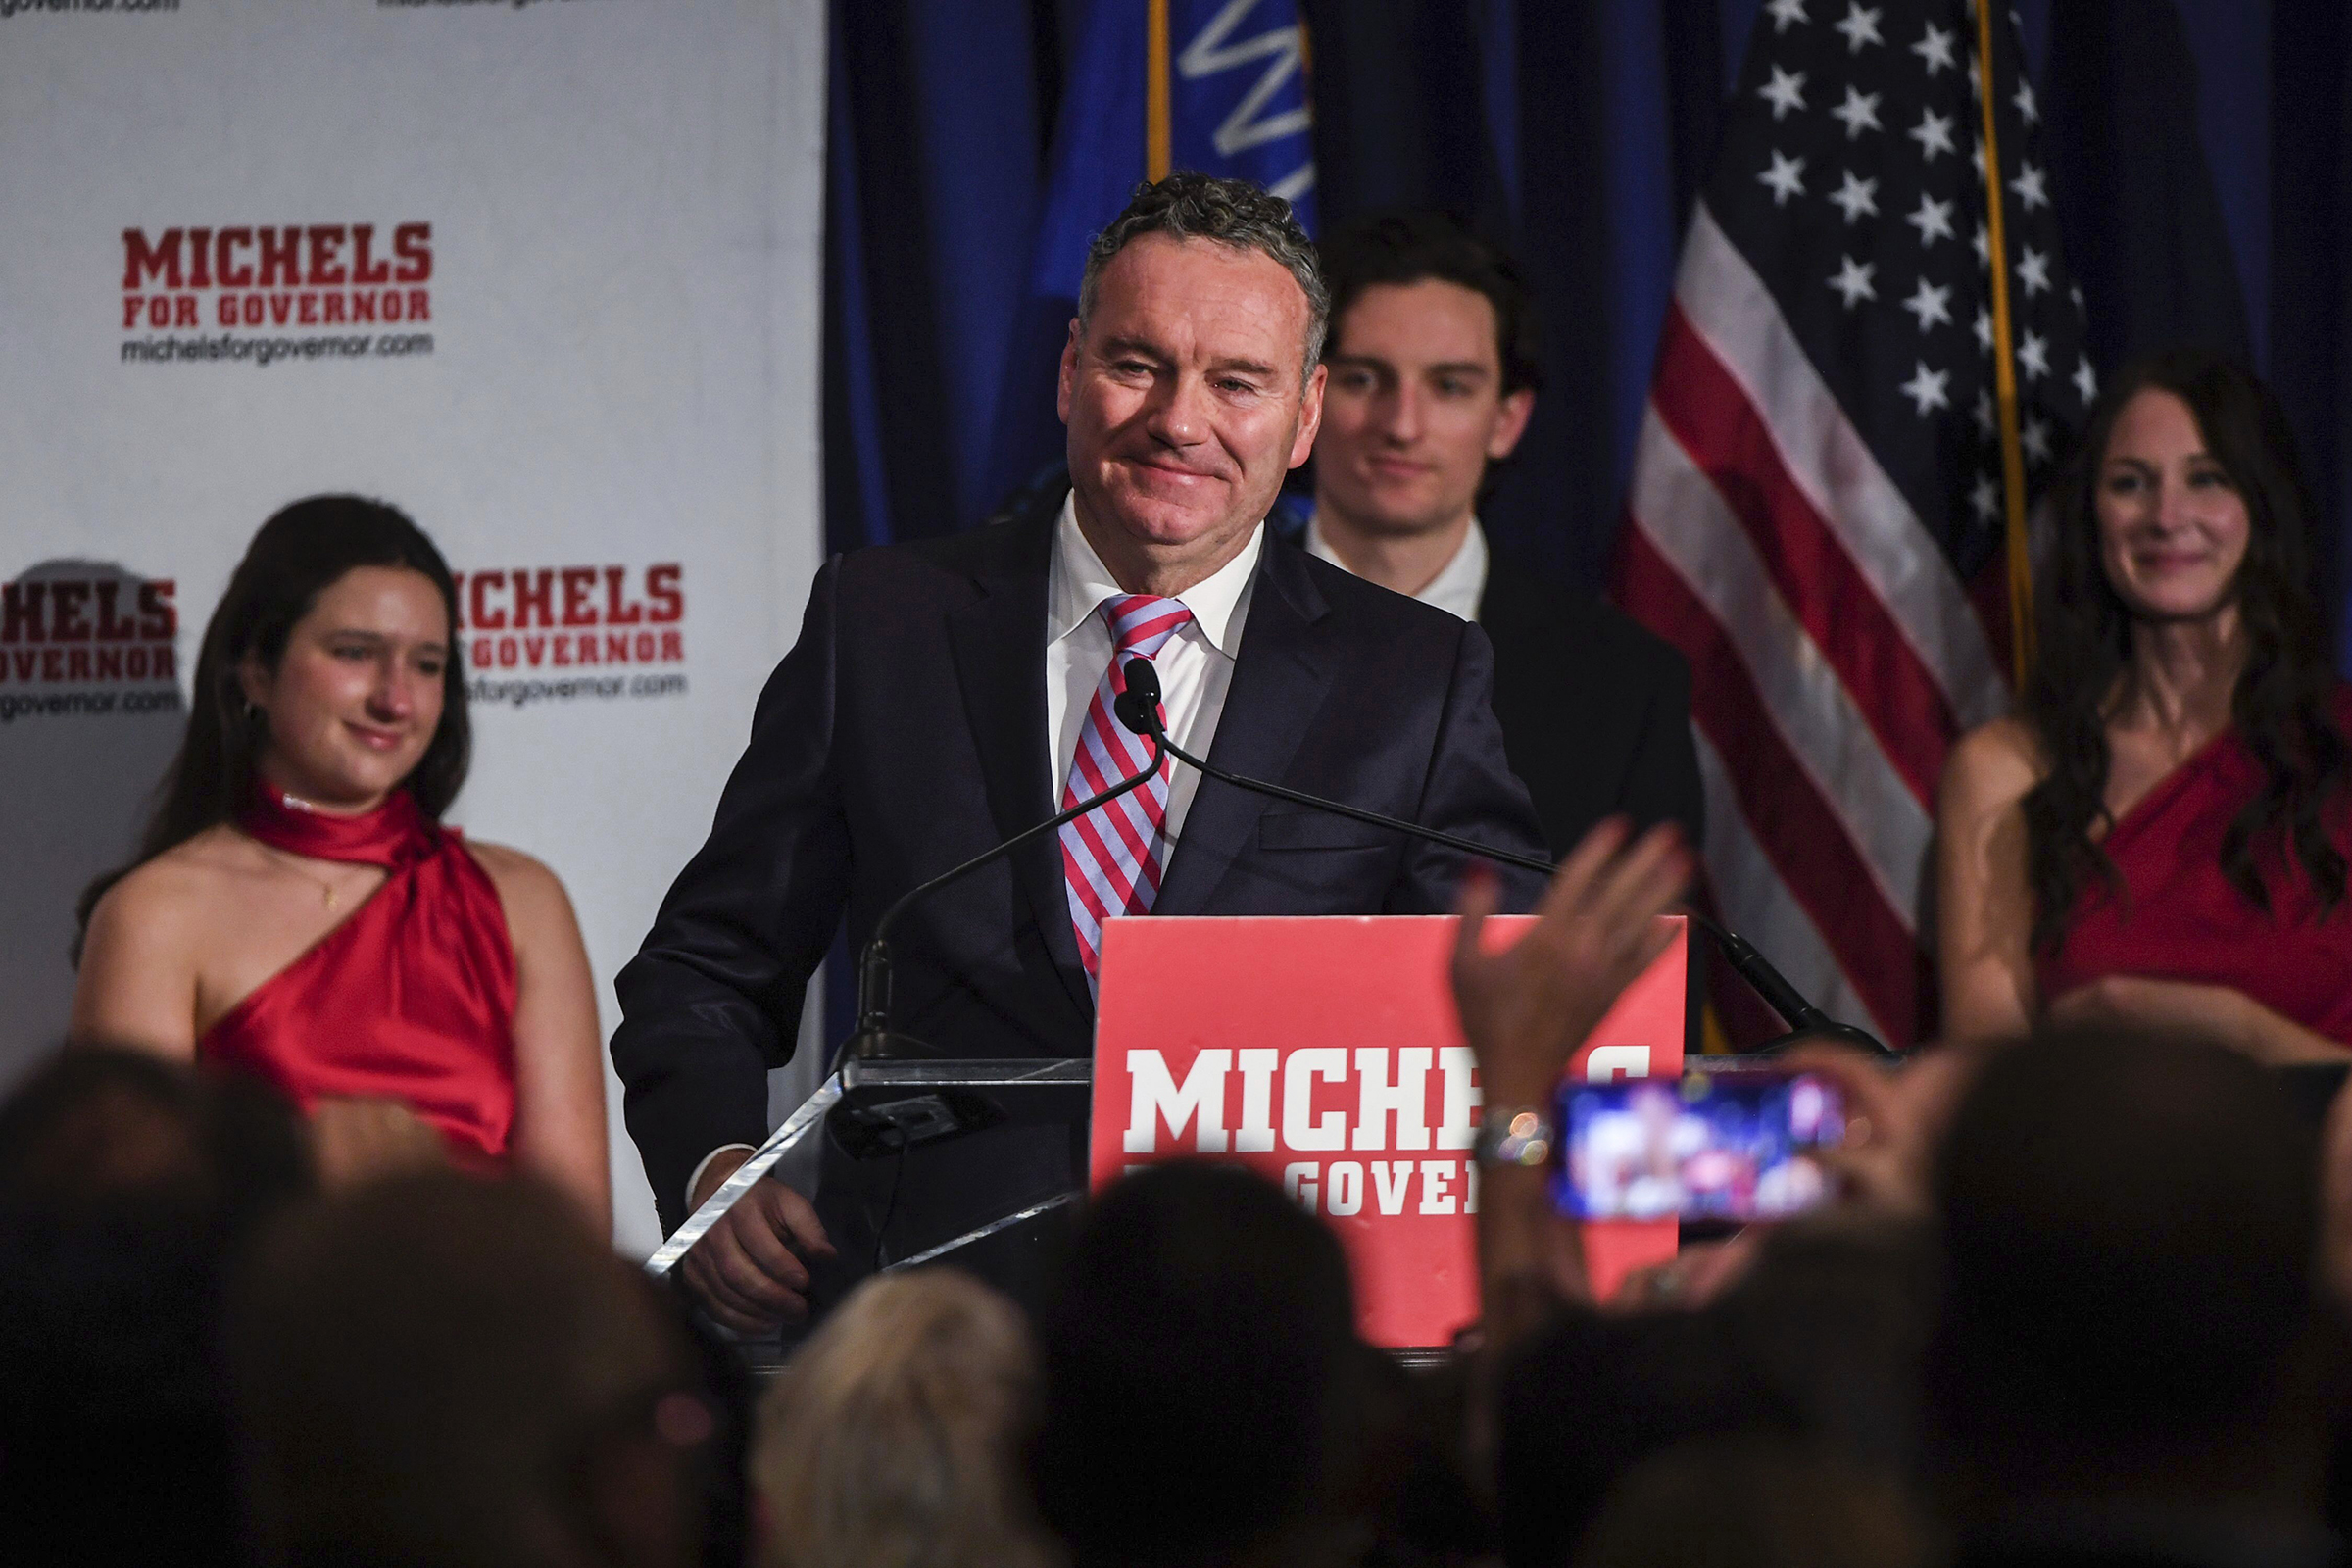 Wisconsin Republican gubernatorial candidate Tim Michels makes his way to the podium to address his supporters